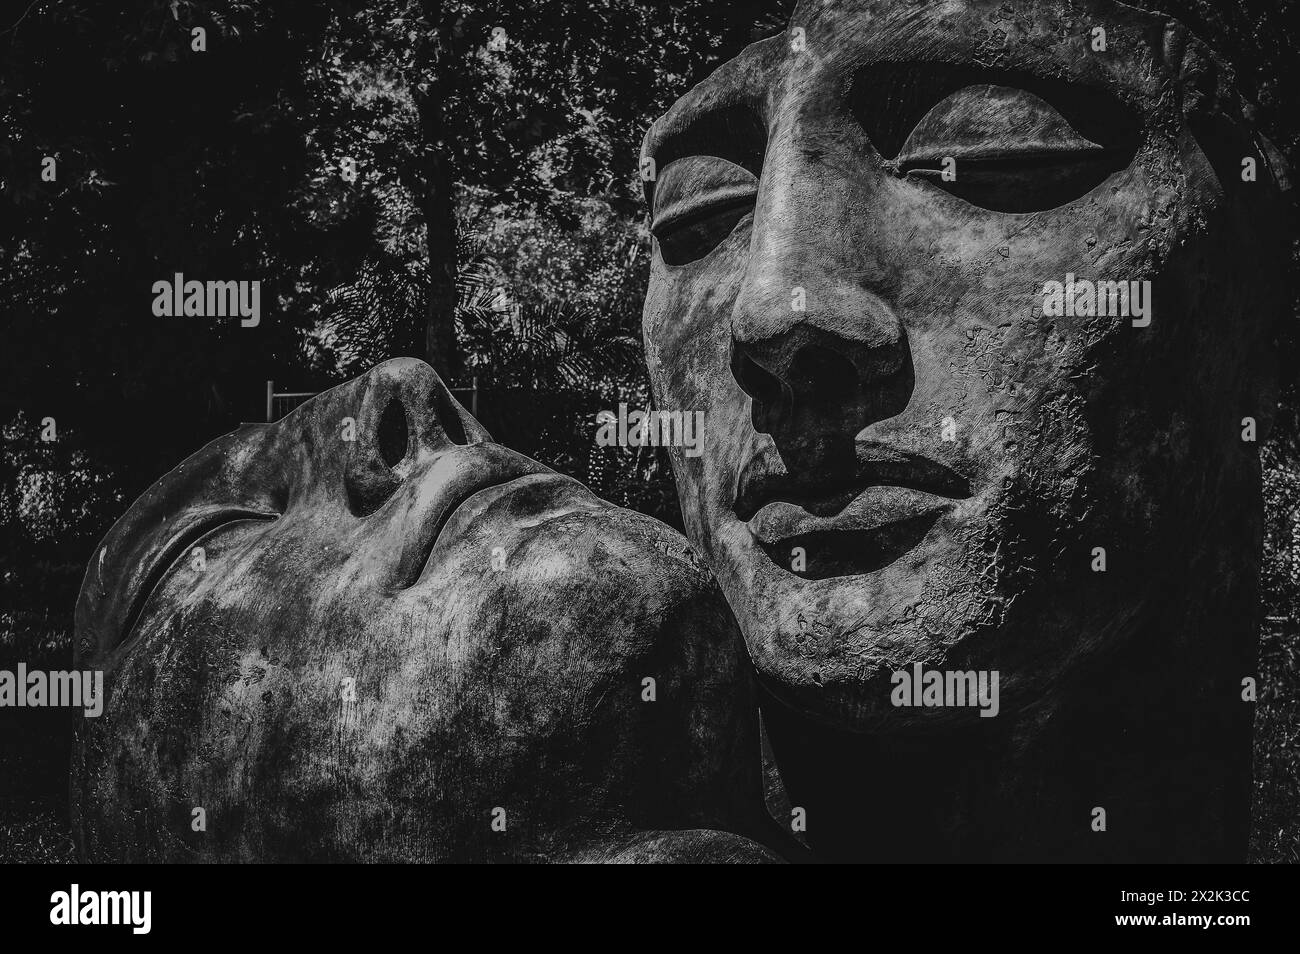 This black and white image captures a large, textured sculpture of a man's face lying on its side, set against a natural backdrop of trees. Stock Photo